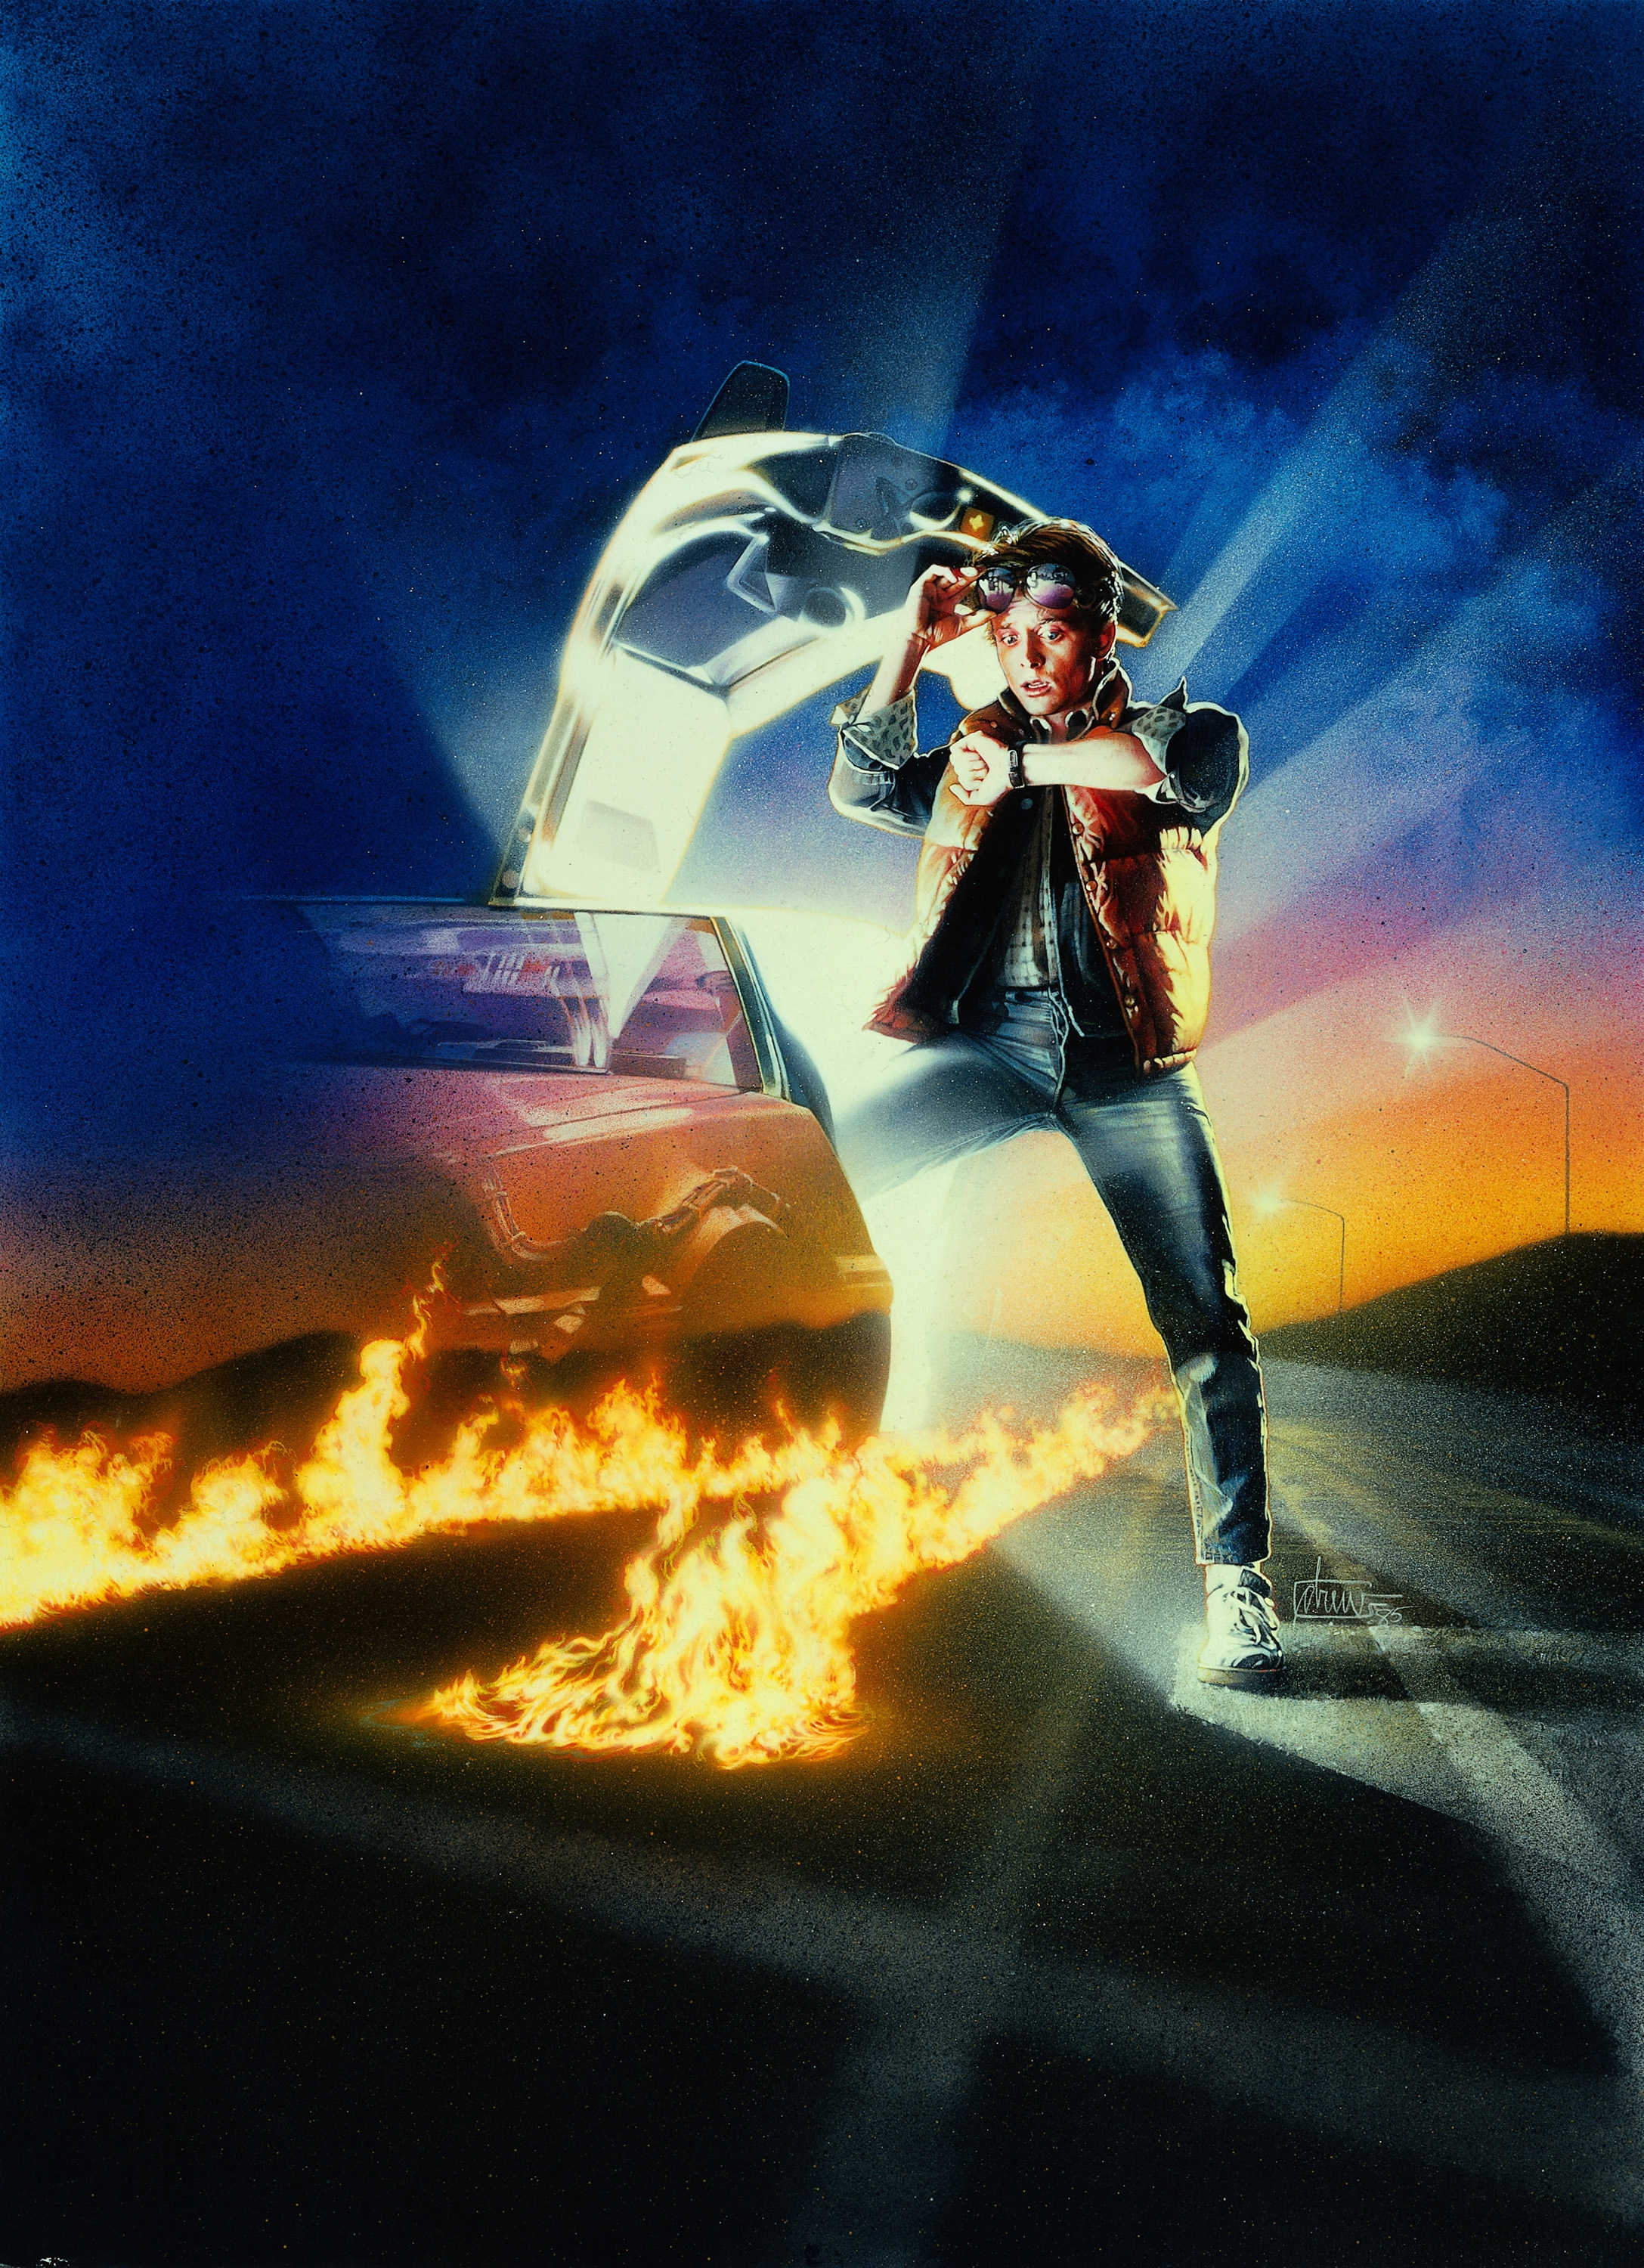 Download Wallpaper, Download back to the future marty mcfly 2175x3000 wallpaper People HD Wallpaper, Hi Res People Wallpaper, High Definition Wallpaper